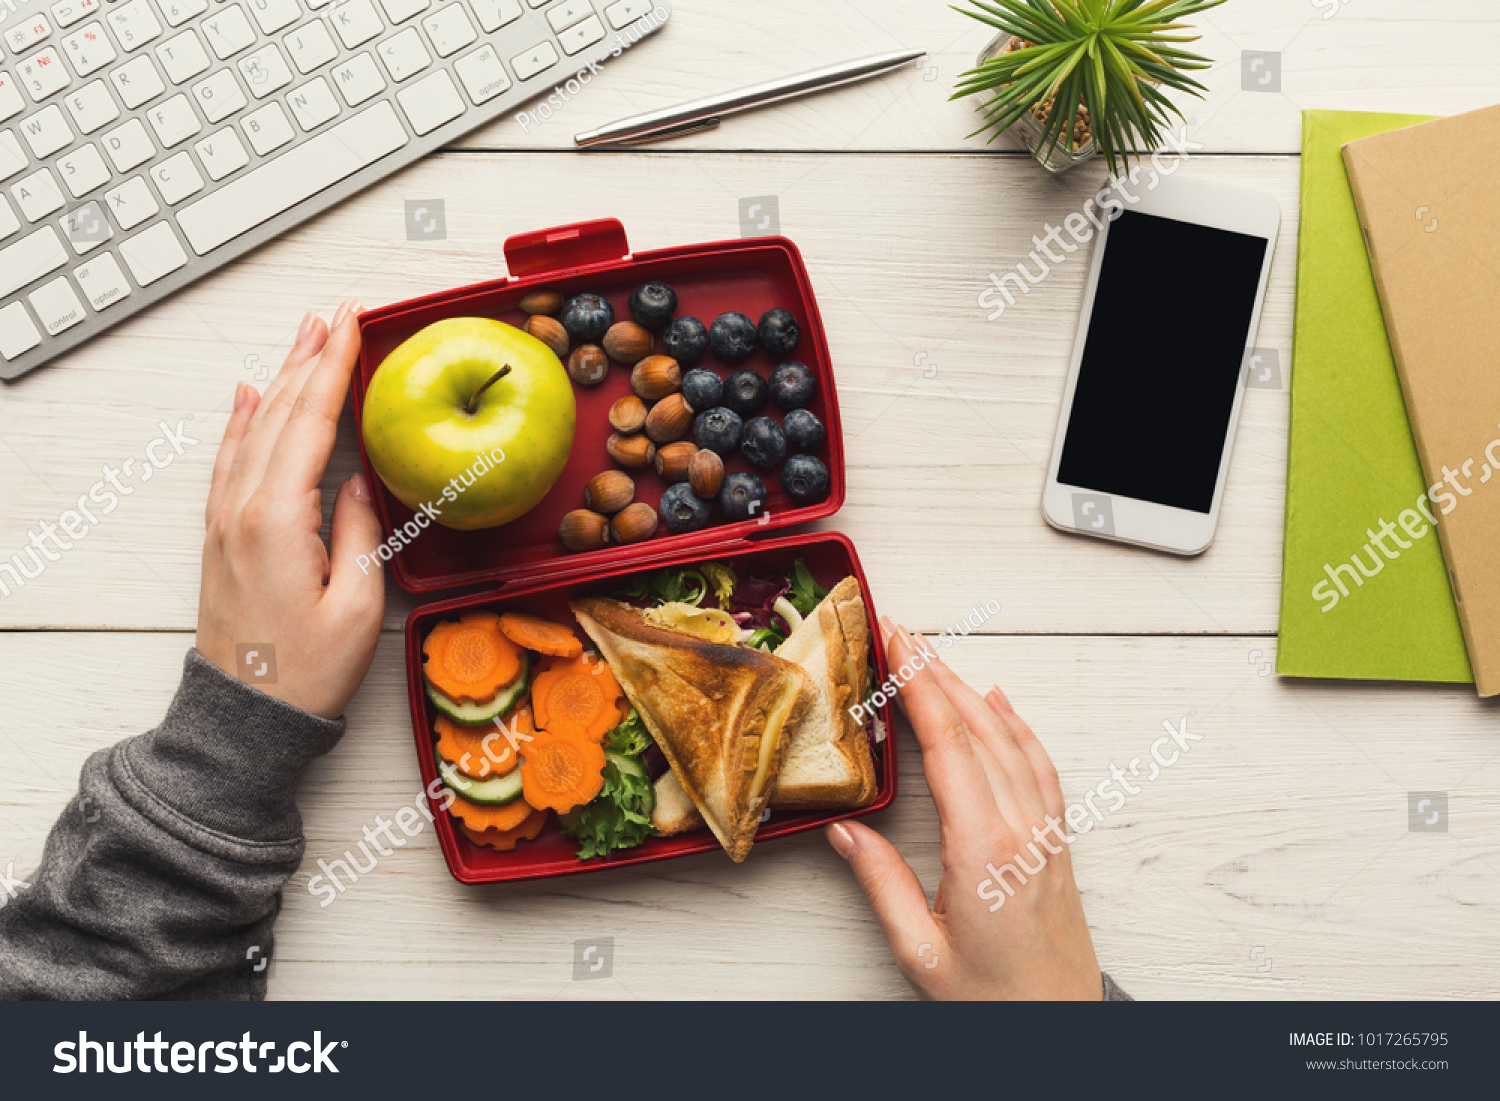 Healthy snack at office workplace. Businesswoman eating organic vegan meals from take away lunch box at wooden working table with computer keyboard and smartphone with empty screen for copy space #1017265795